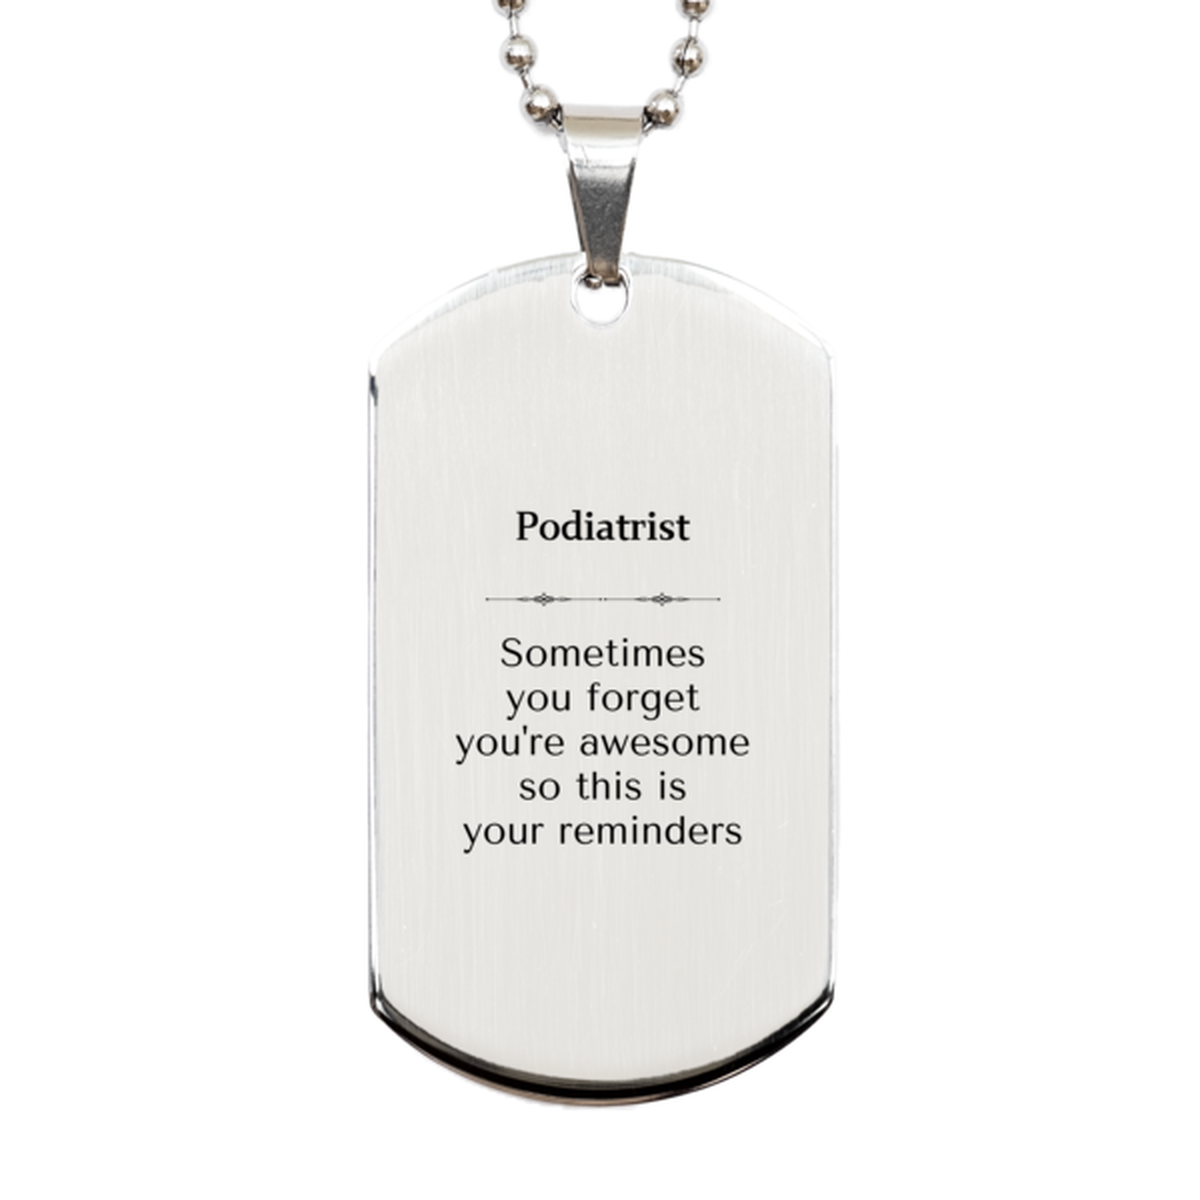 Sentimental Podiatrist Silver Dog Tag, Podiatrist Sometimes you forget you're awesome so this is your reminders, Graduation Christmas Birthday Gifts for Podiatrist, Men, Women, Coworkers